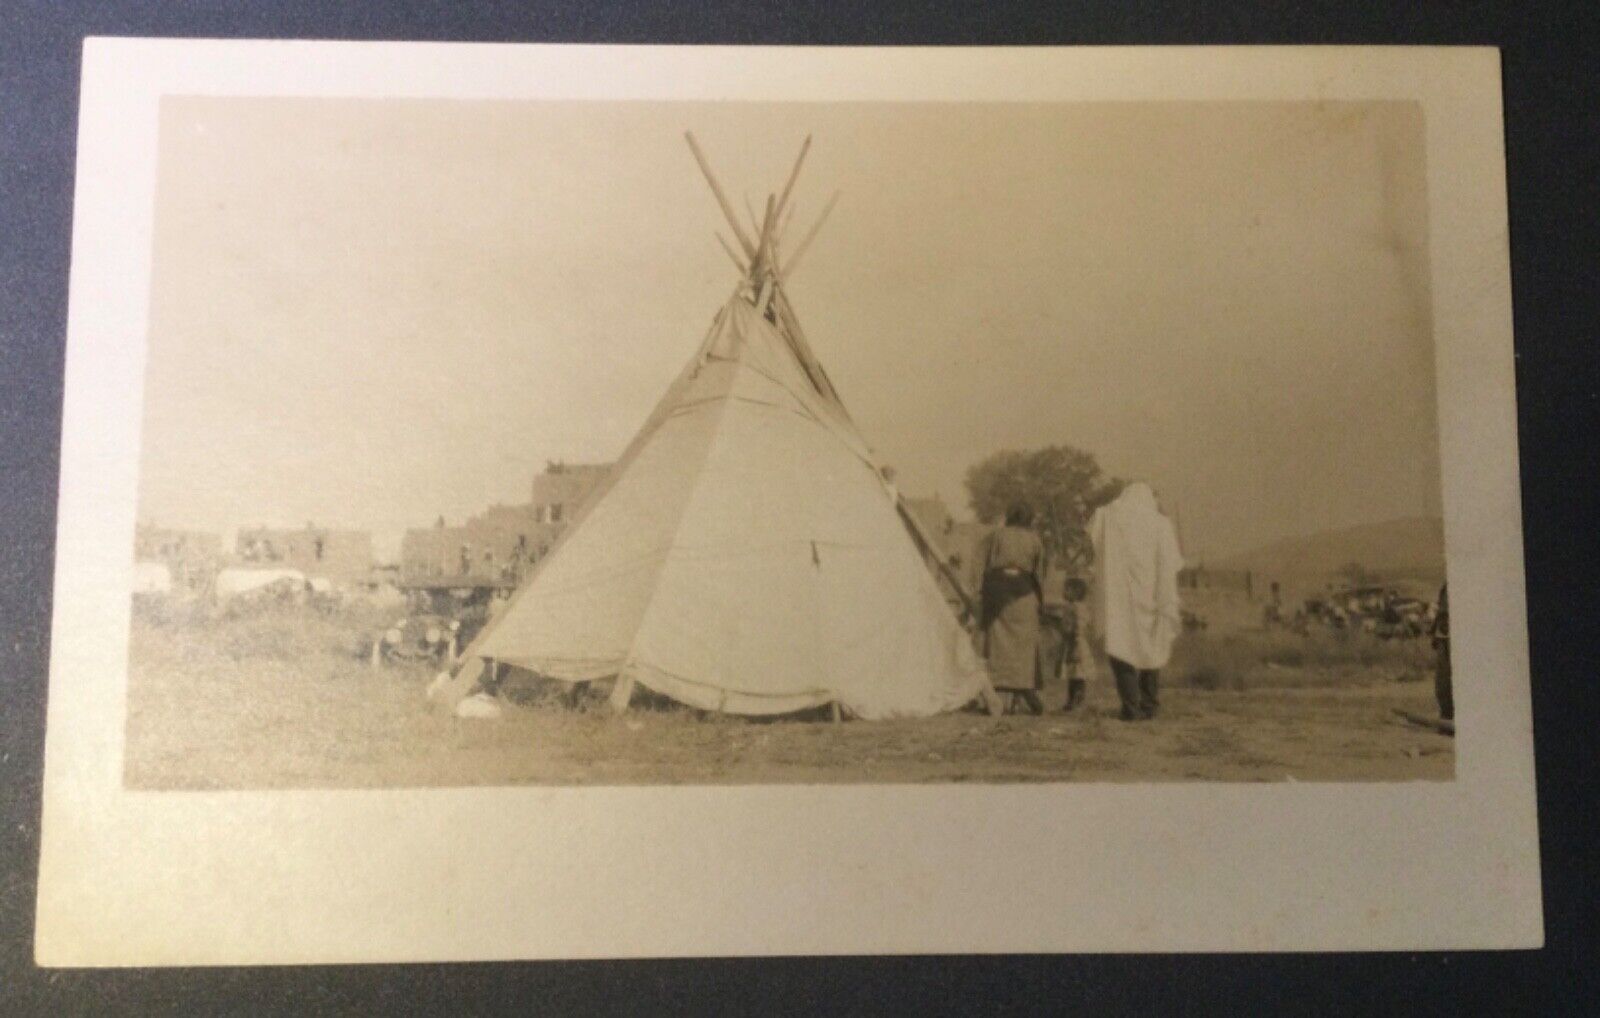 Early 1900s candid RPPC - Native American teepee w/people and grand pueblos